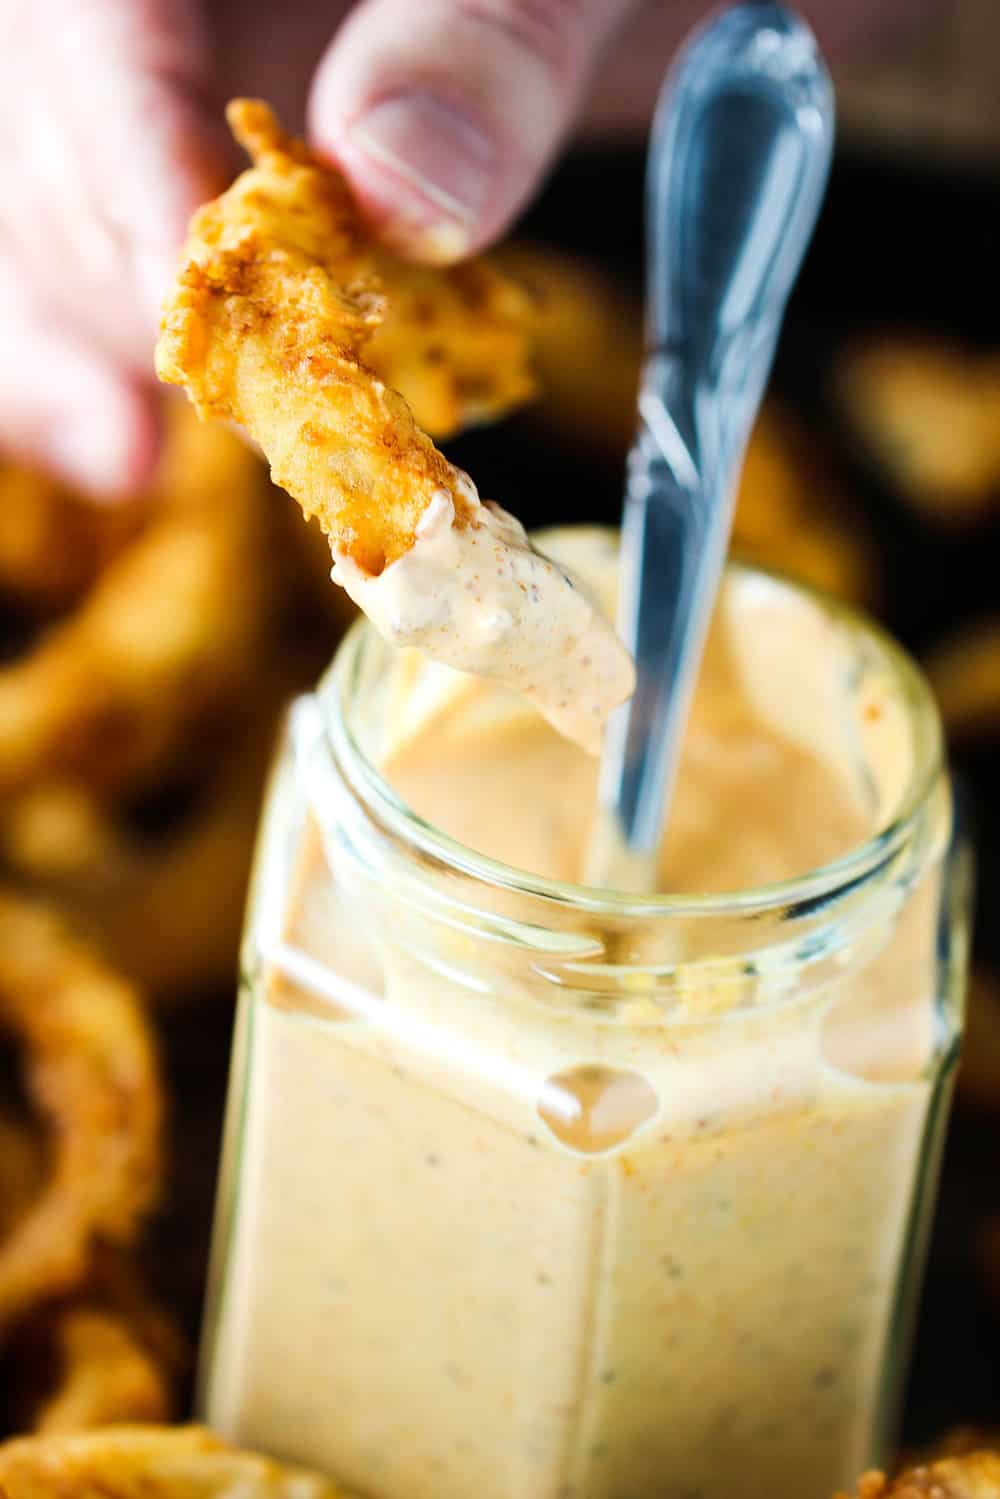 Onion ring dipping into a jar of remoulade sauce